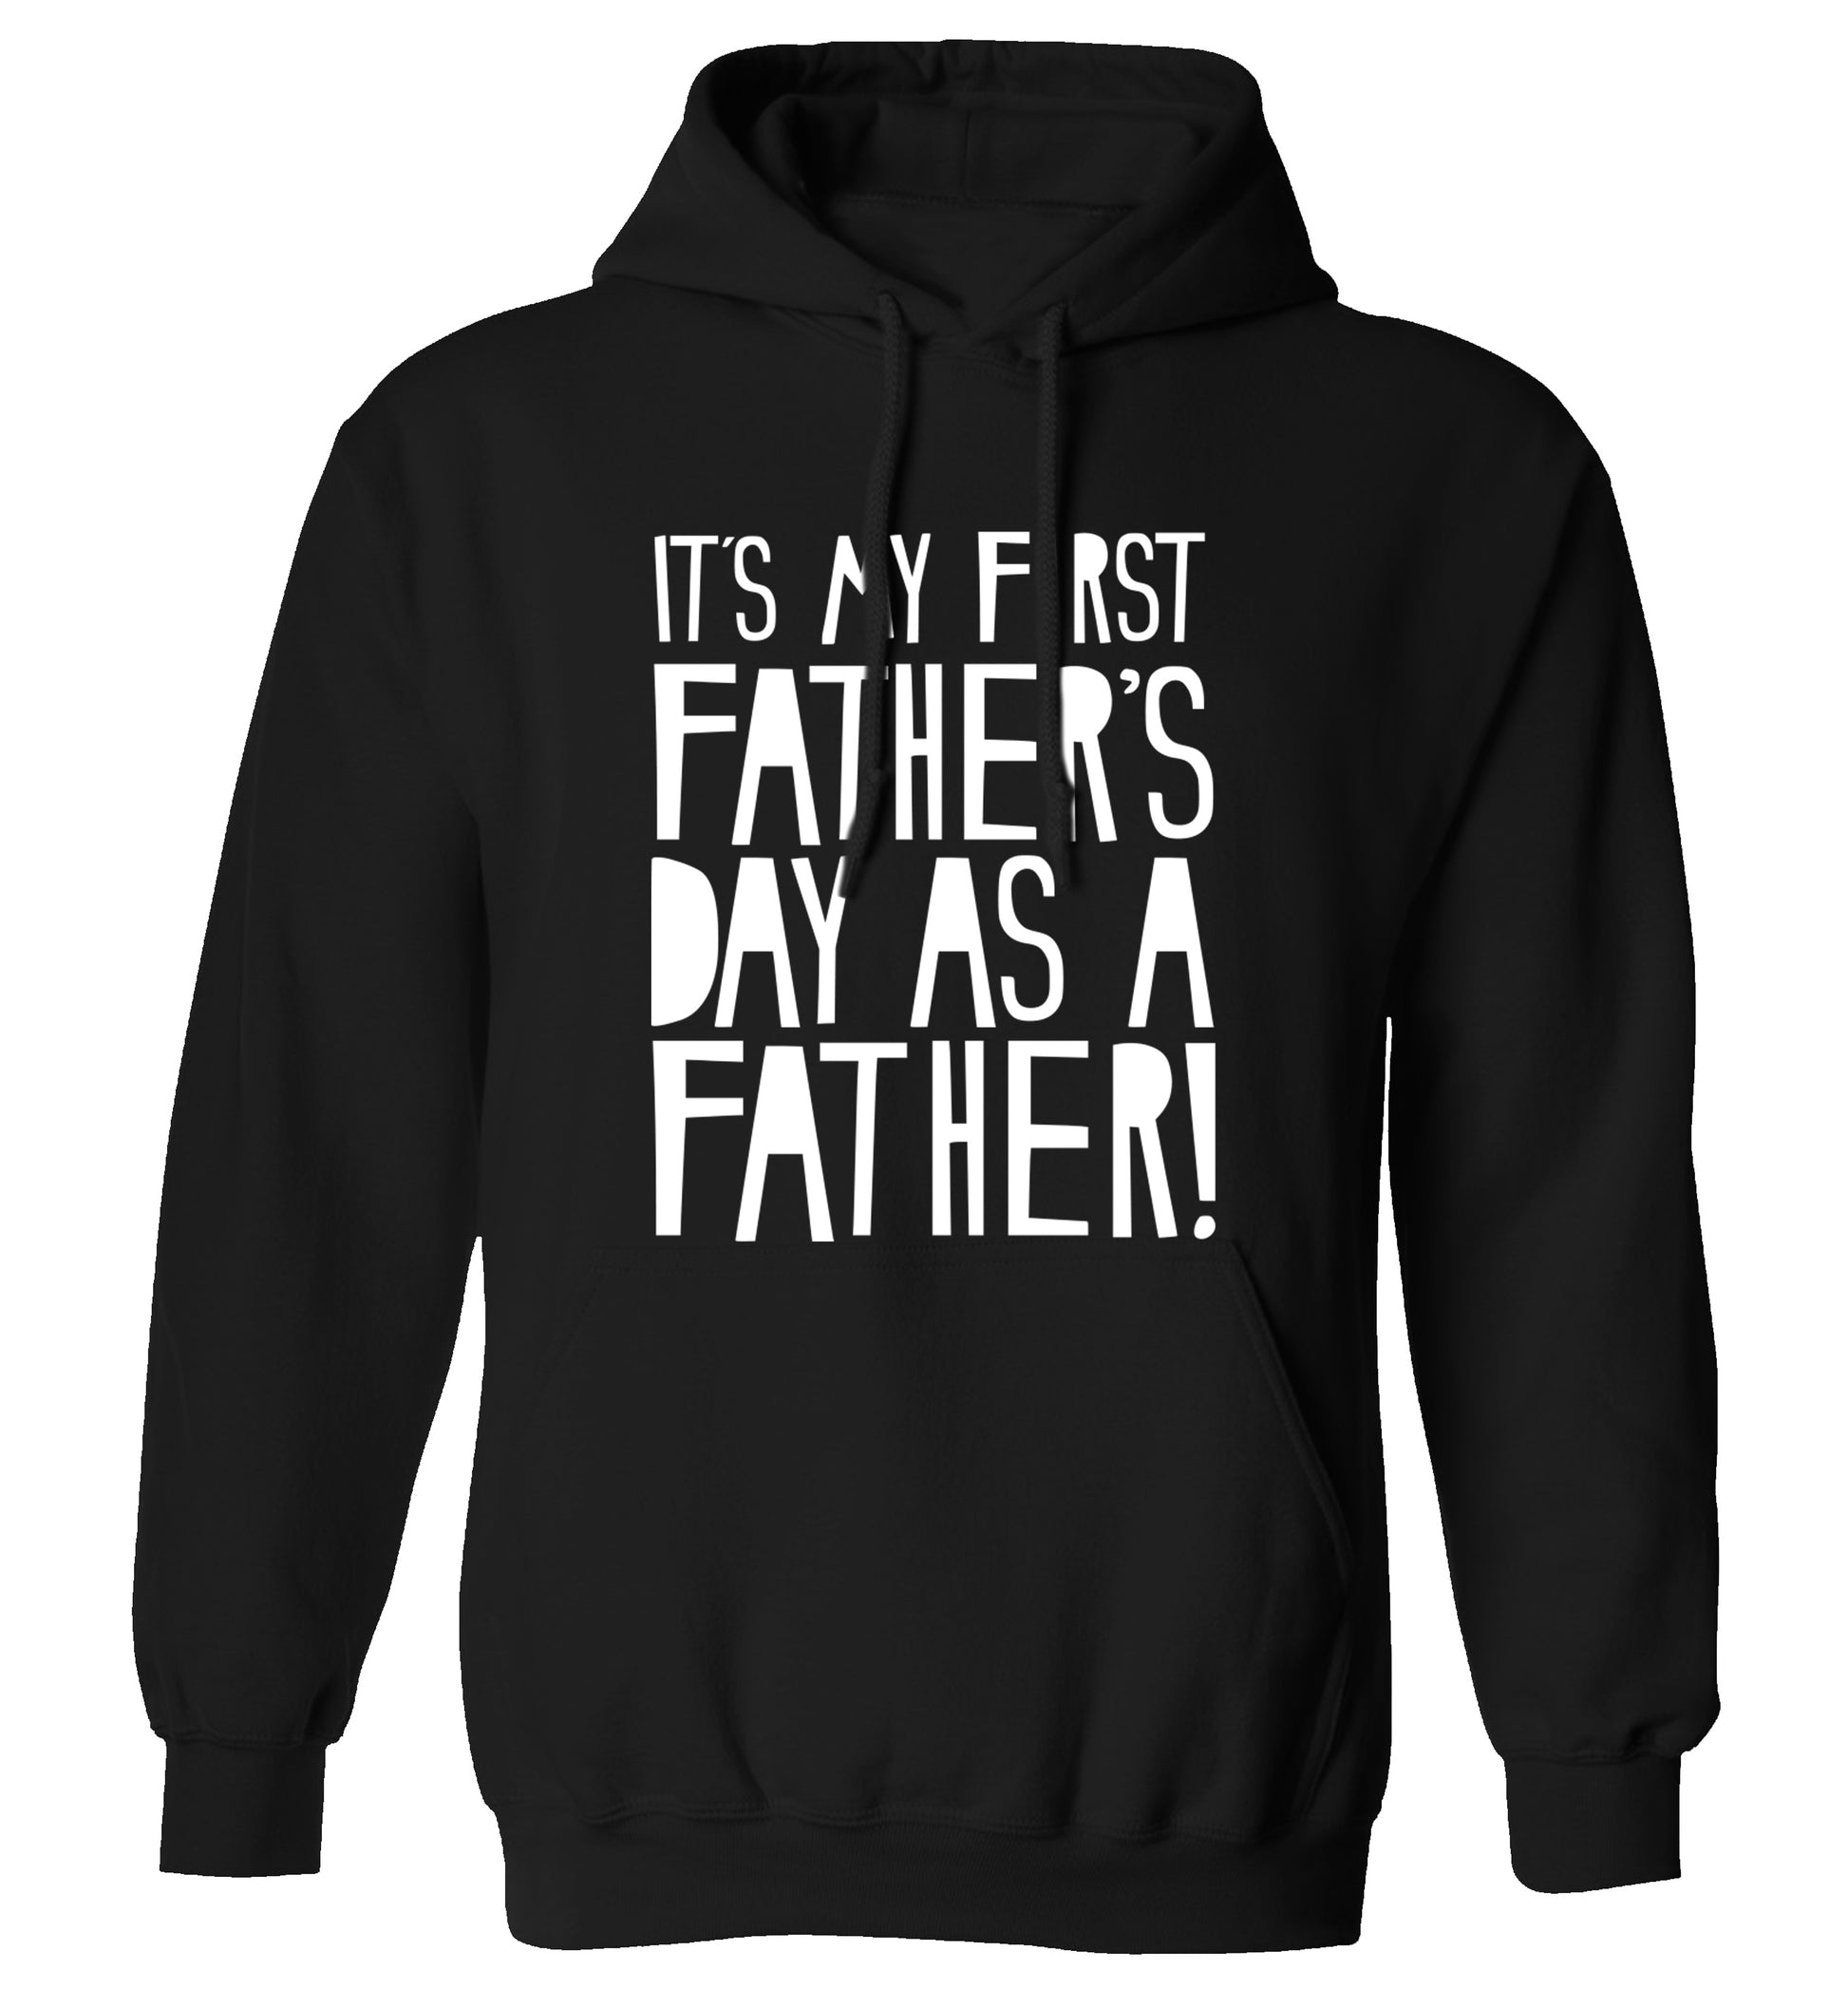 It's my first Father's Day as a father! adults unisex black hoodie 2XL